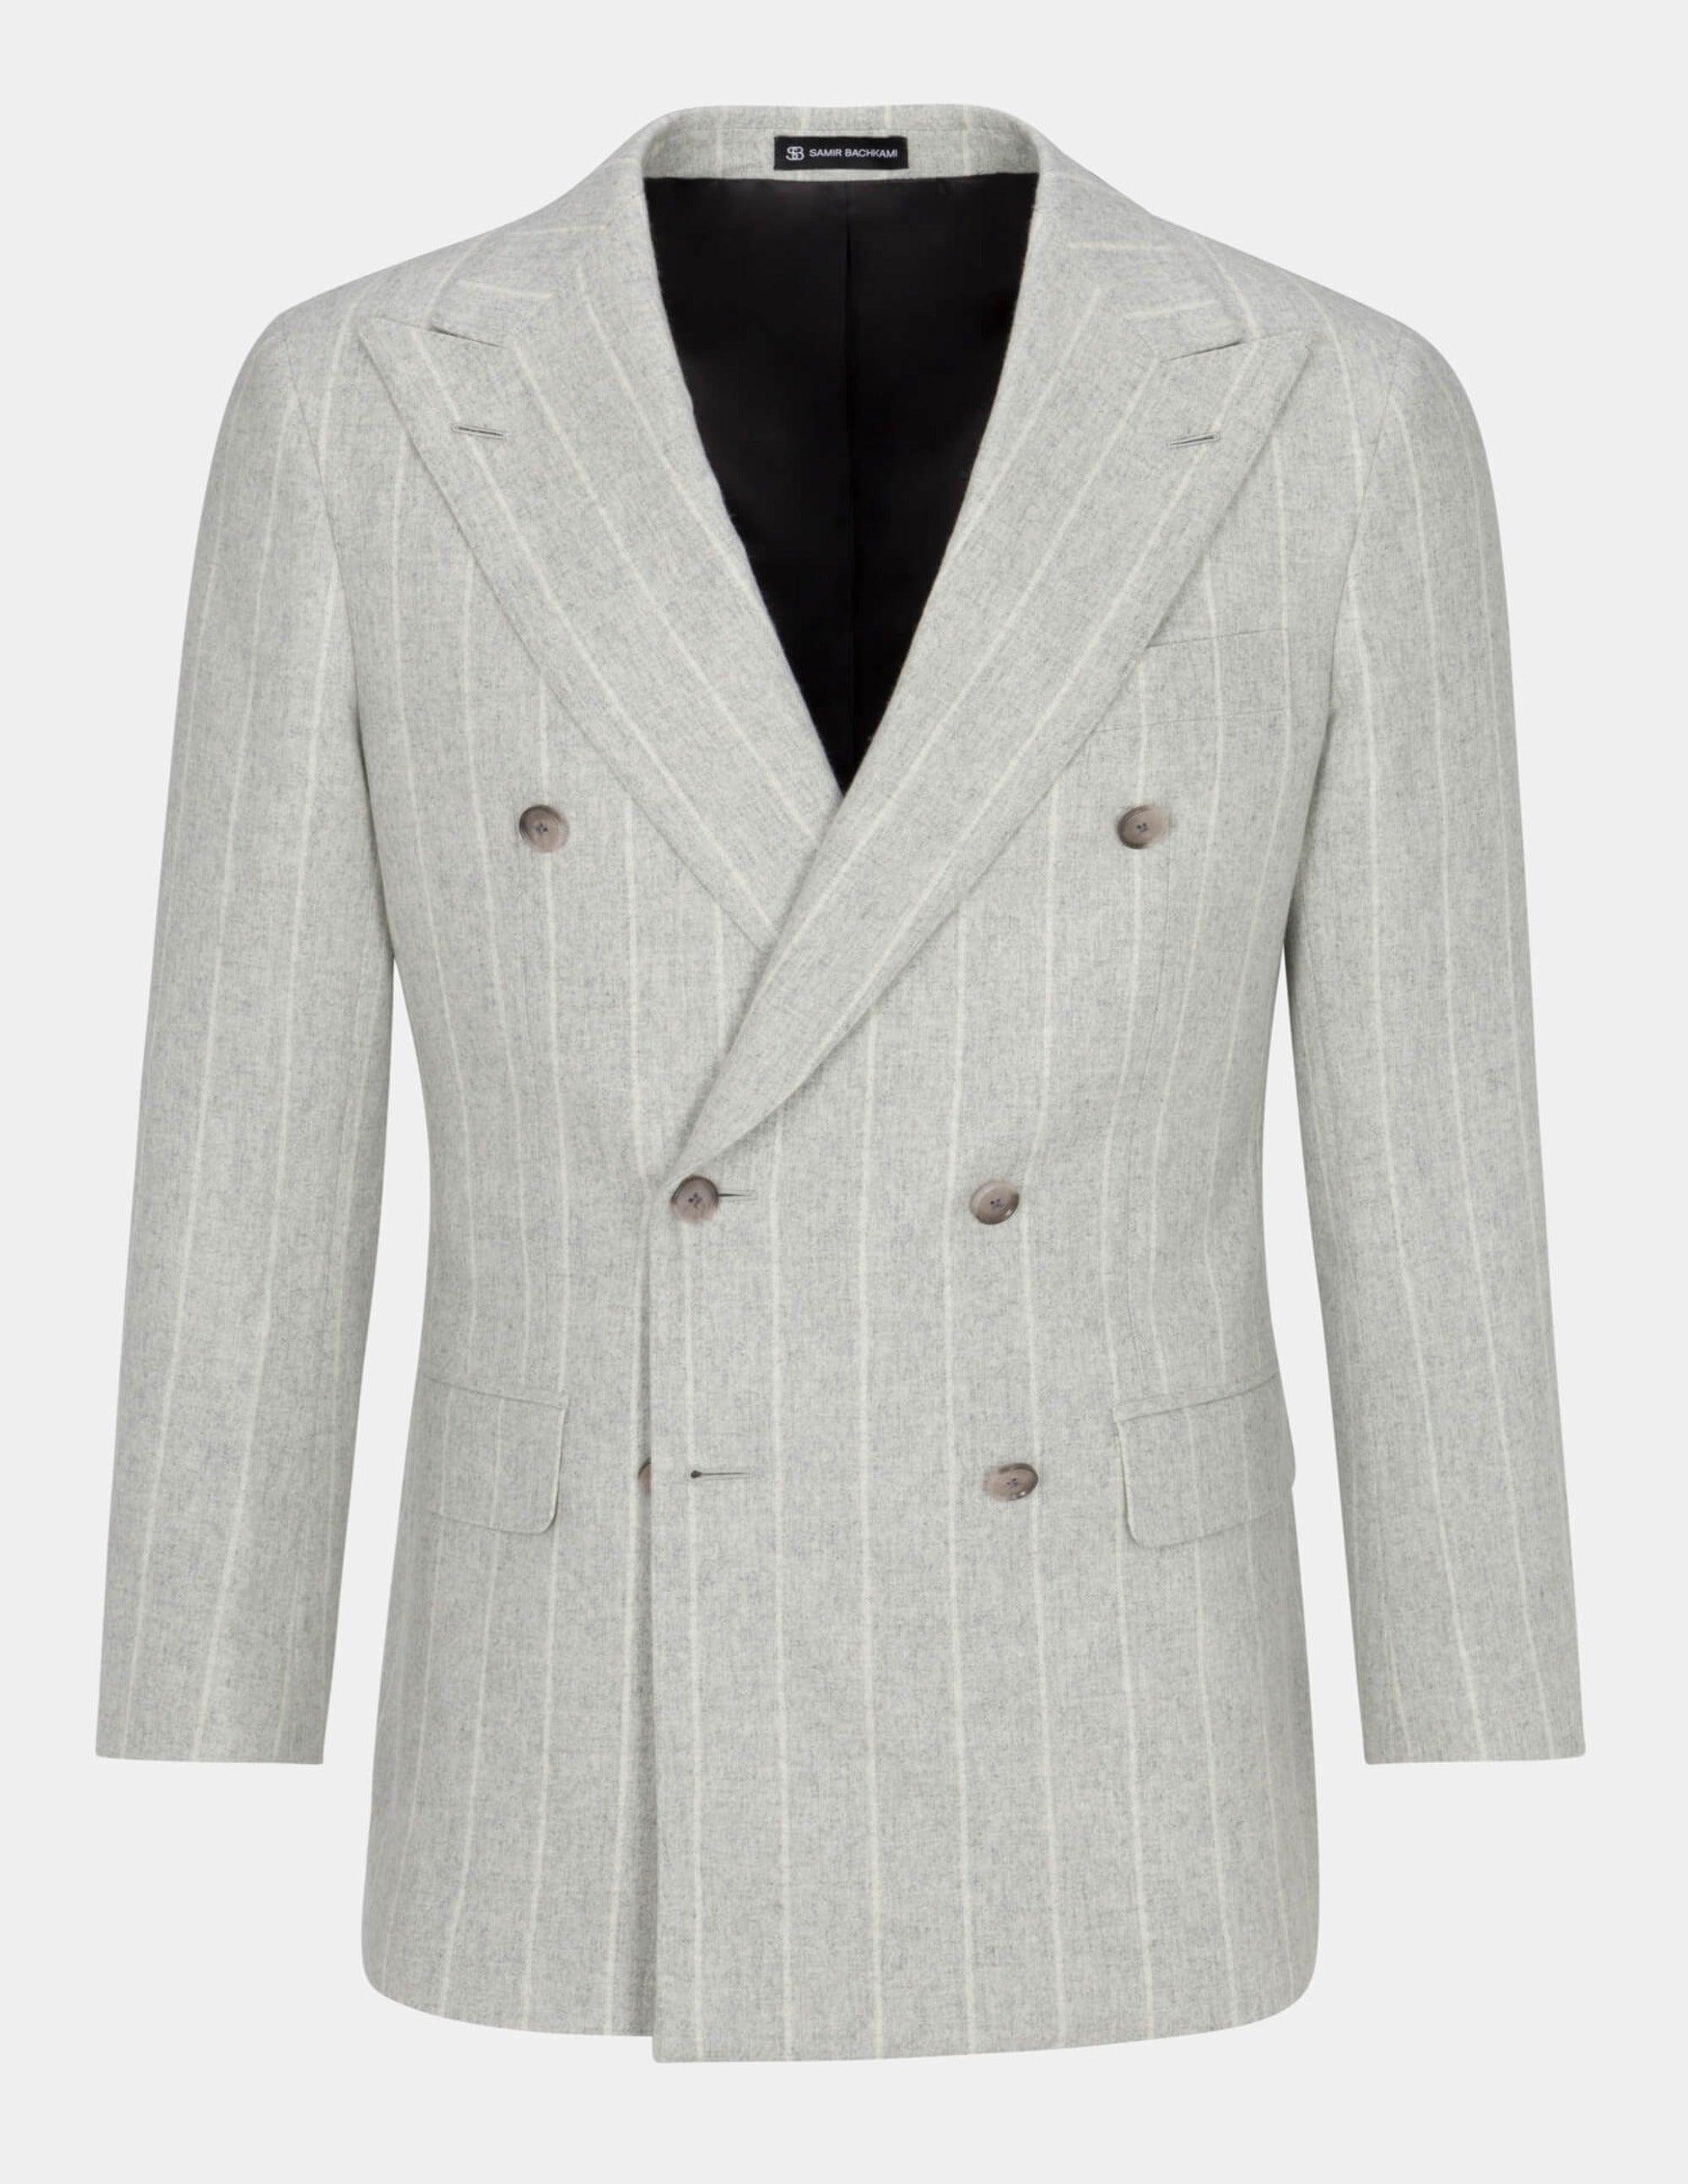 Grey White Stripe Double Breasted Suit - Samir Bachkami